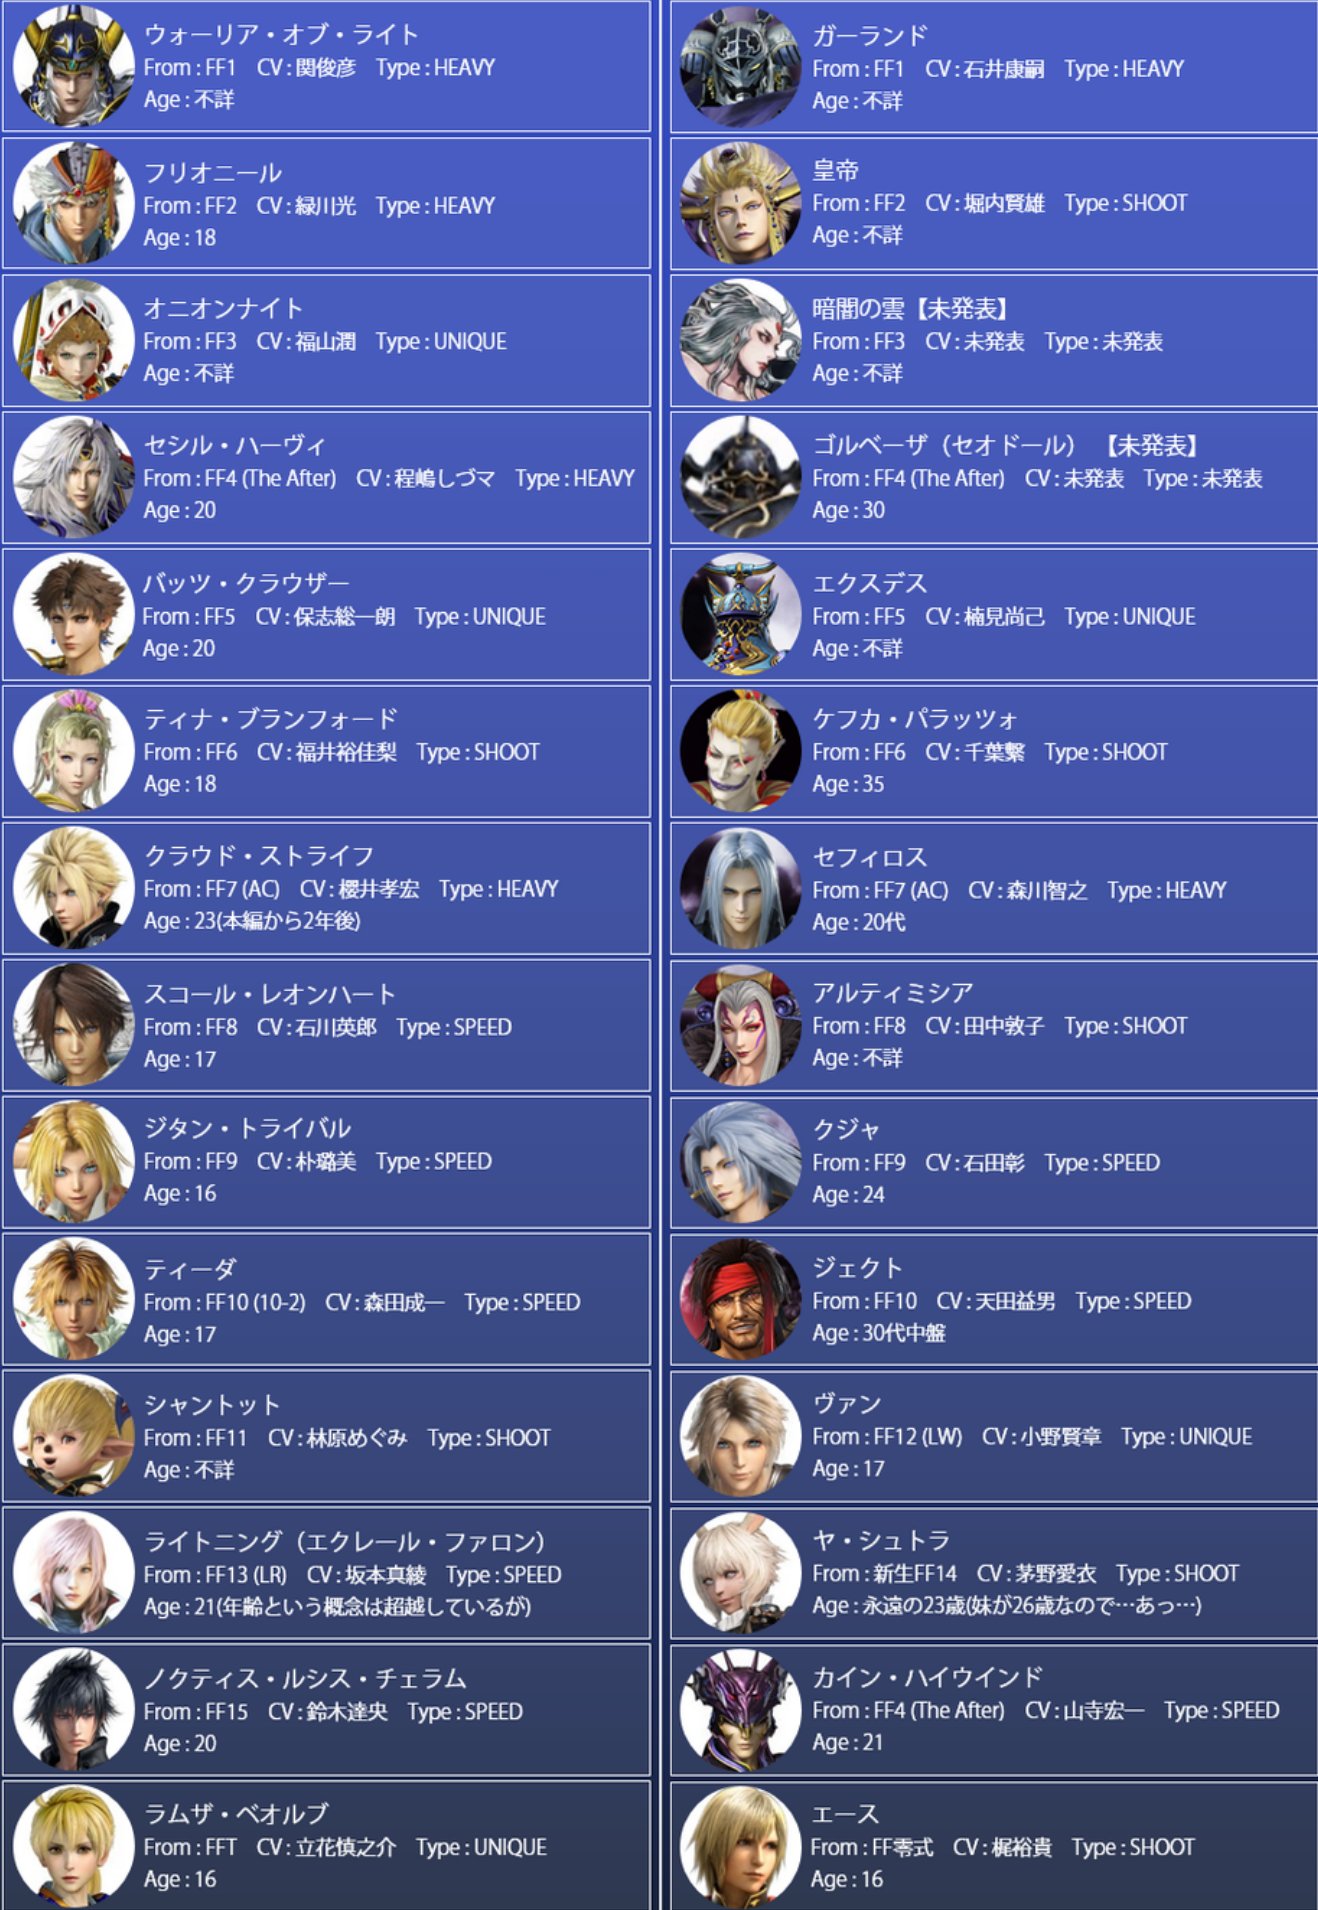 Final Fantasy 10: Every Main Character's Age And Height